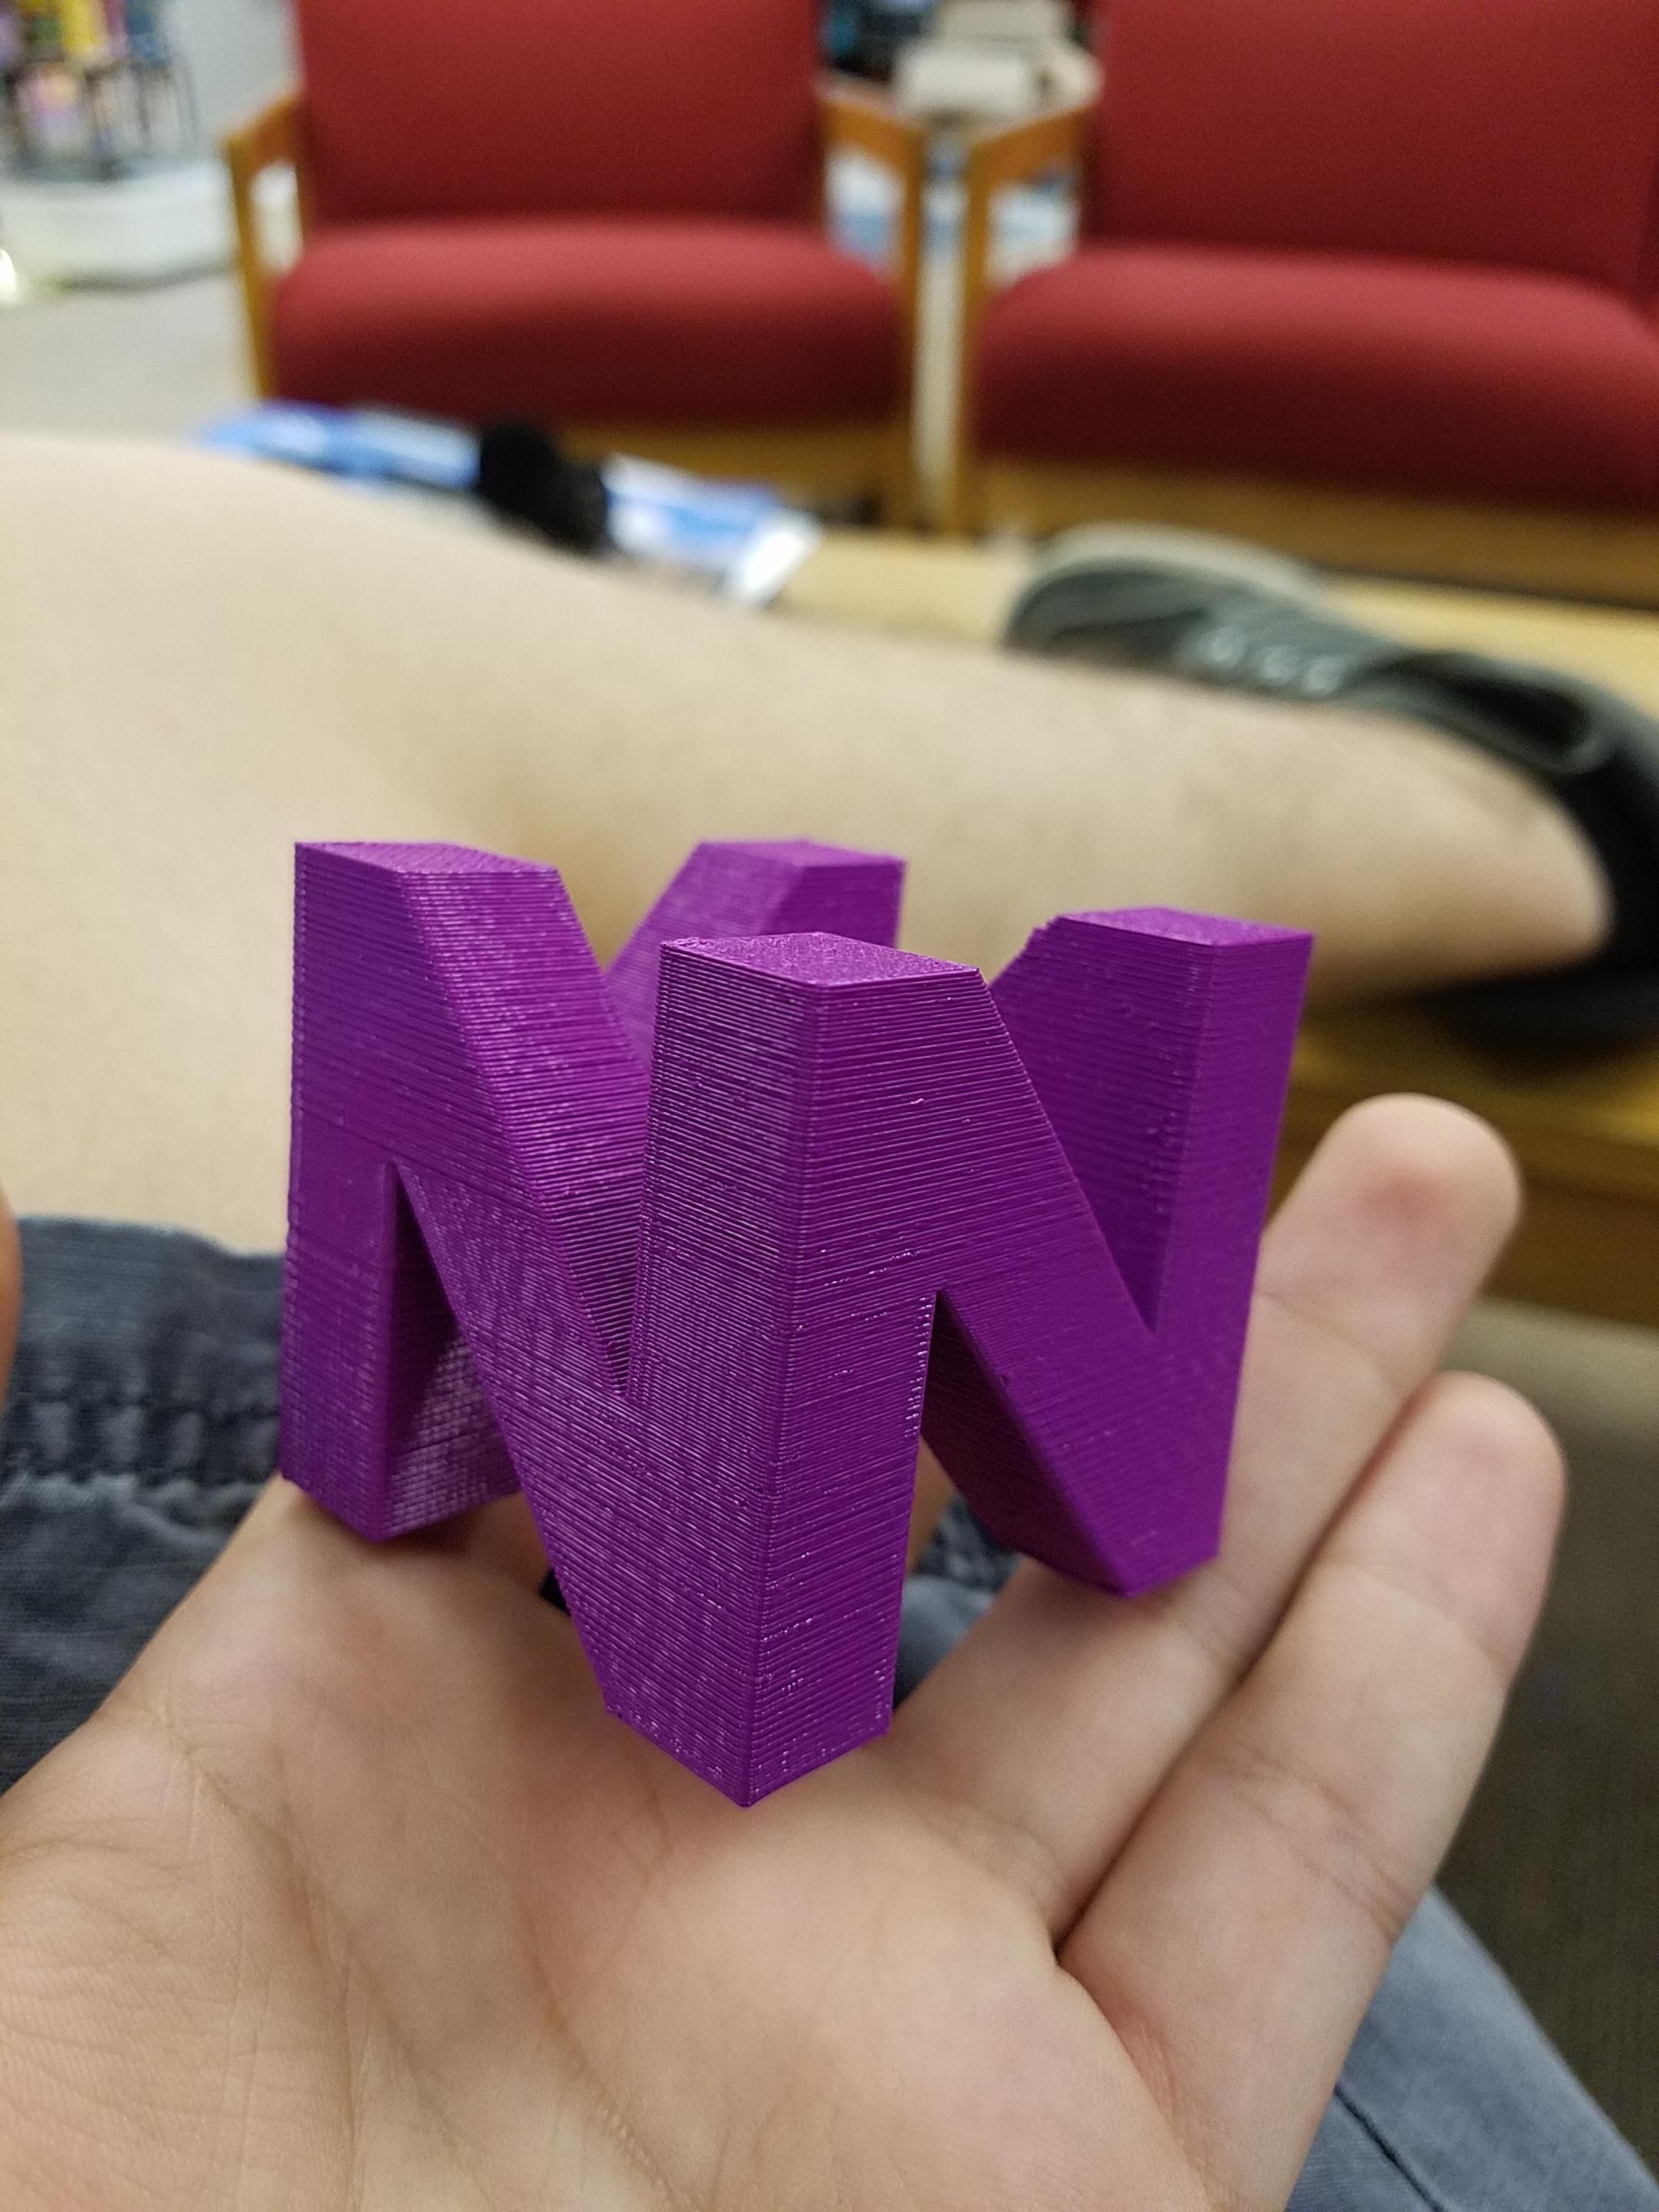 Made my first ever 3d print today!